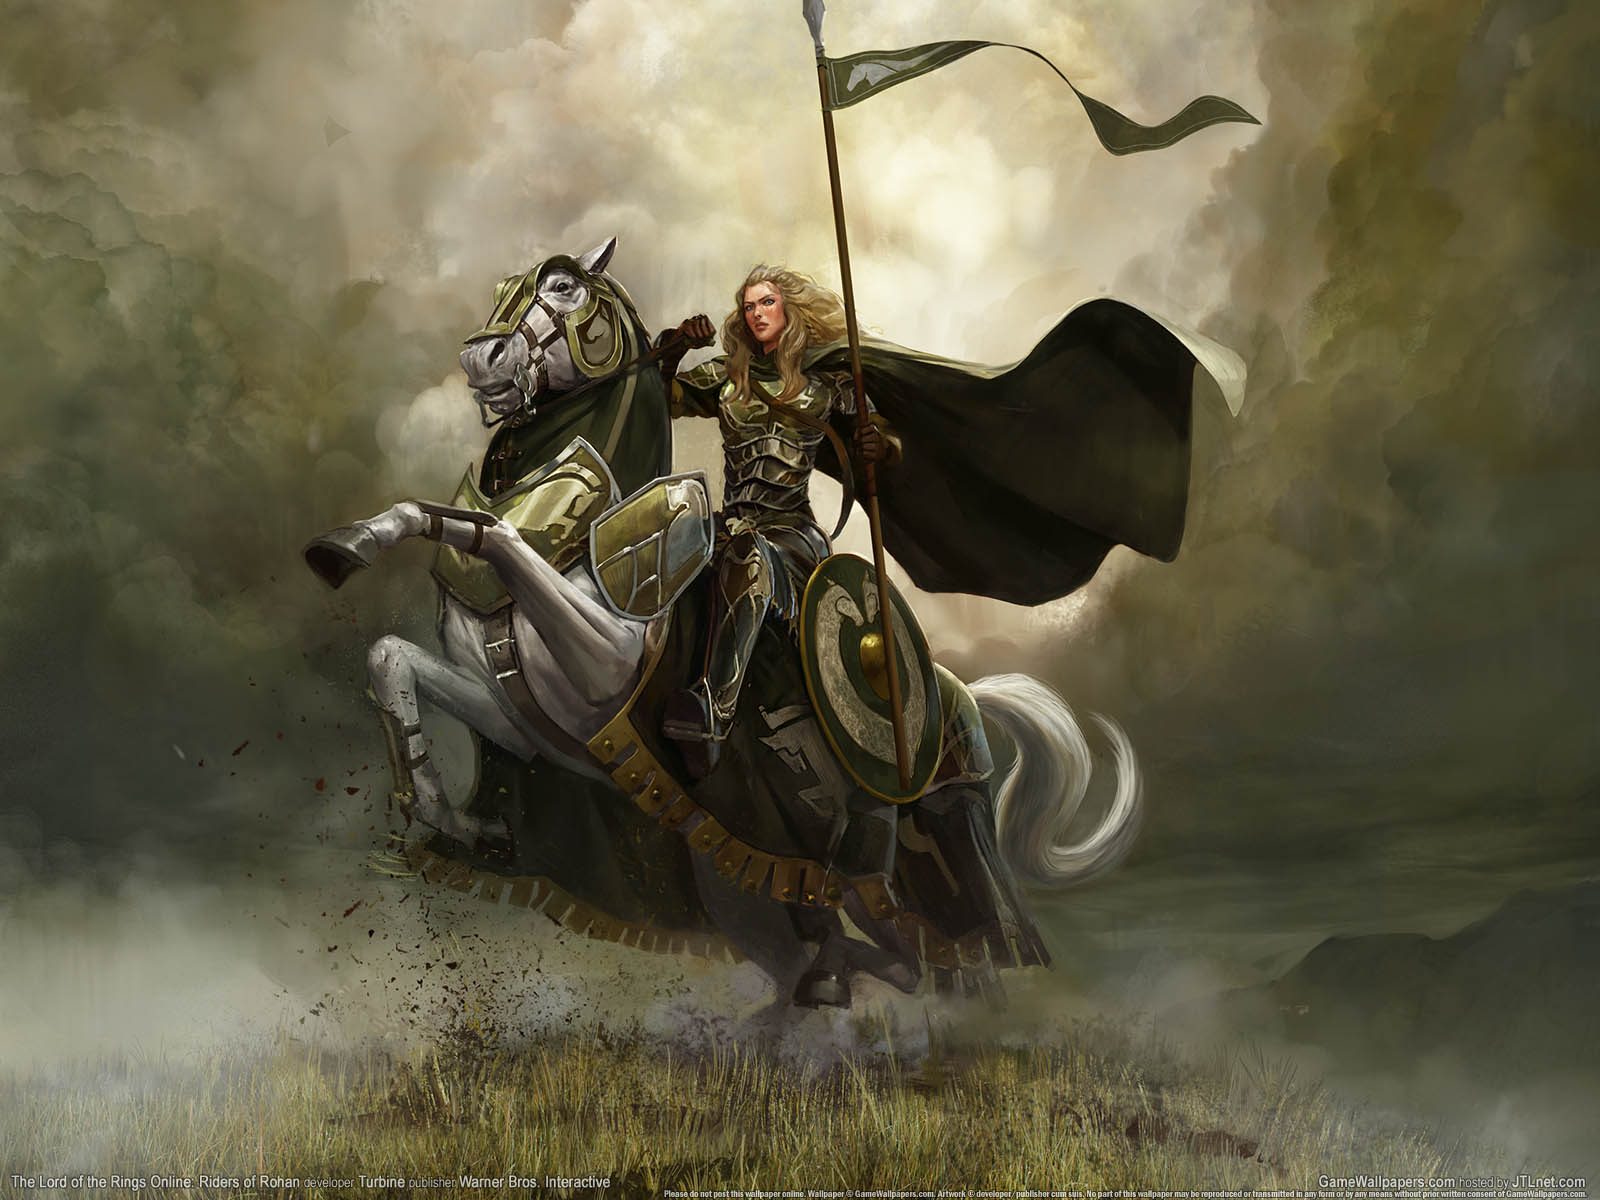 The Lord of the Rings Online%25253A Riders of Rohan wallpaper 02 1600x1200